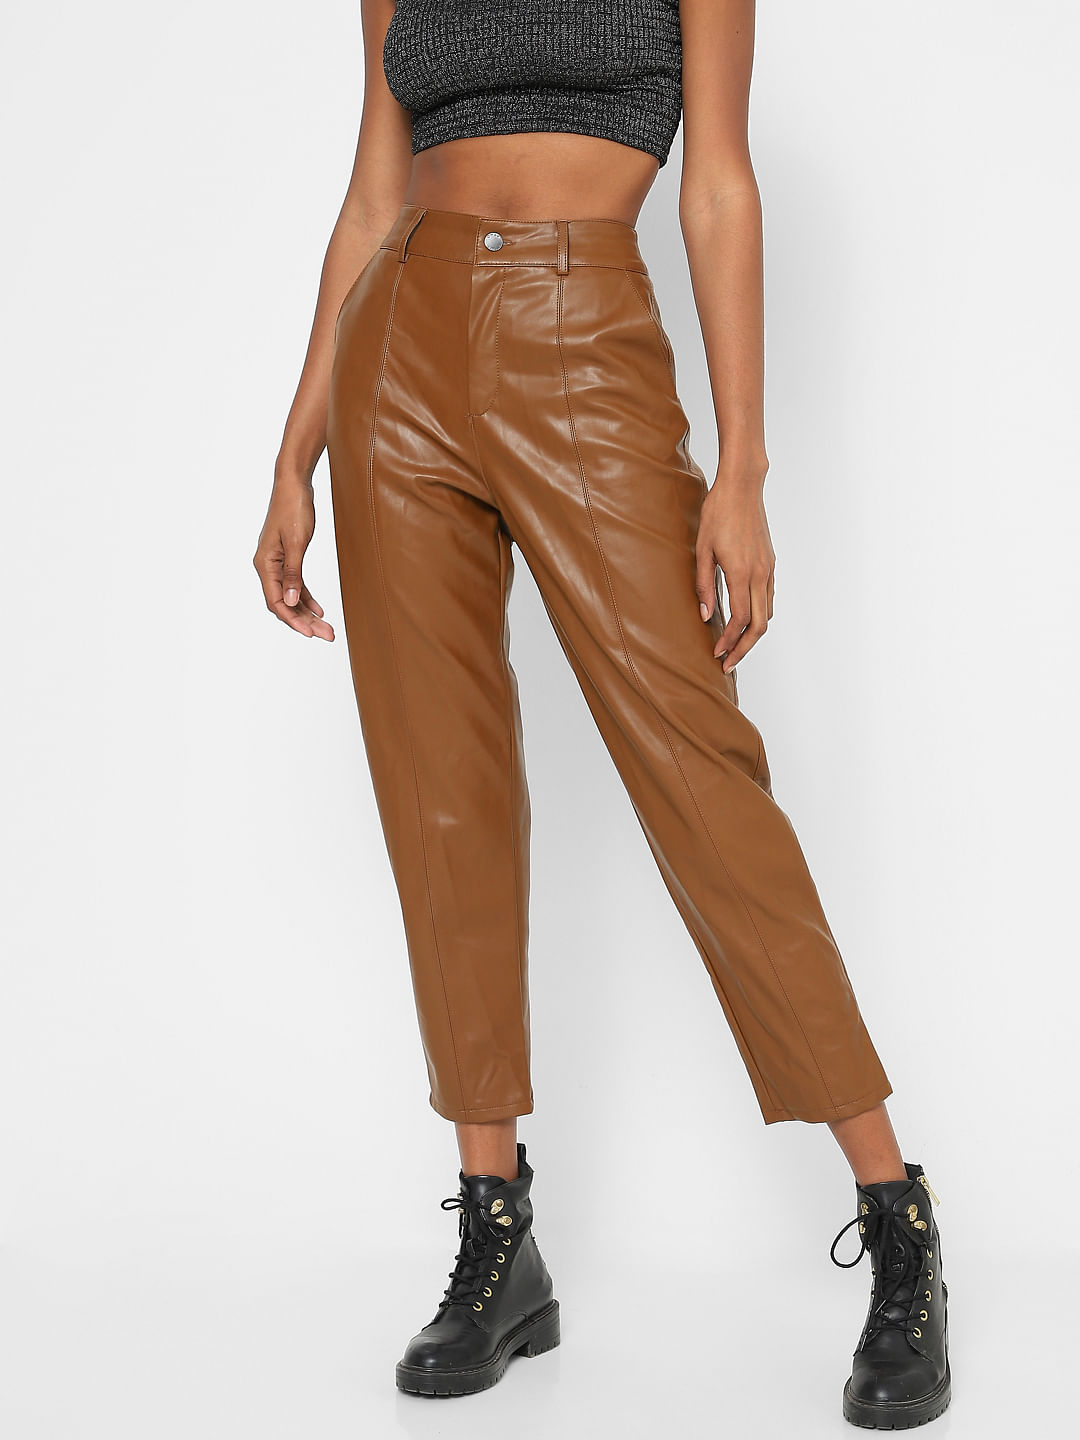 Cropped Leather Flares  Cropped pants outfit Casual street wear Flared  pants outfit